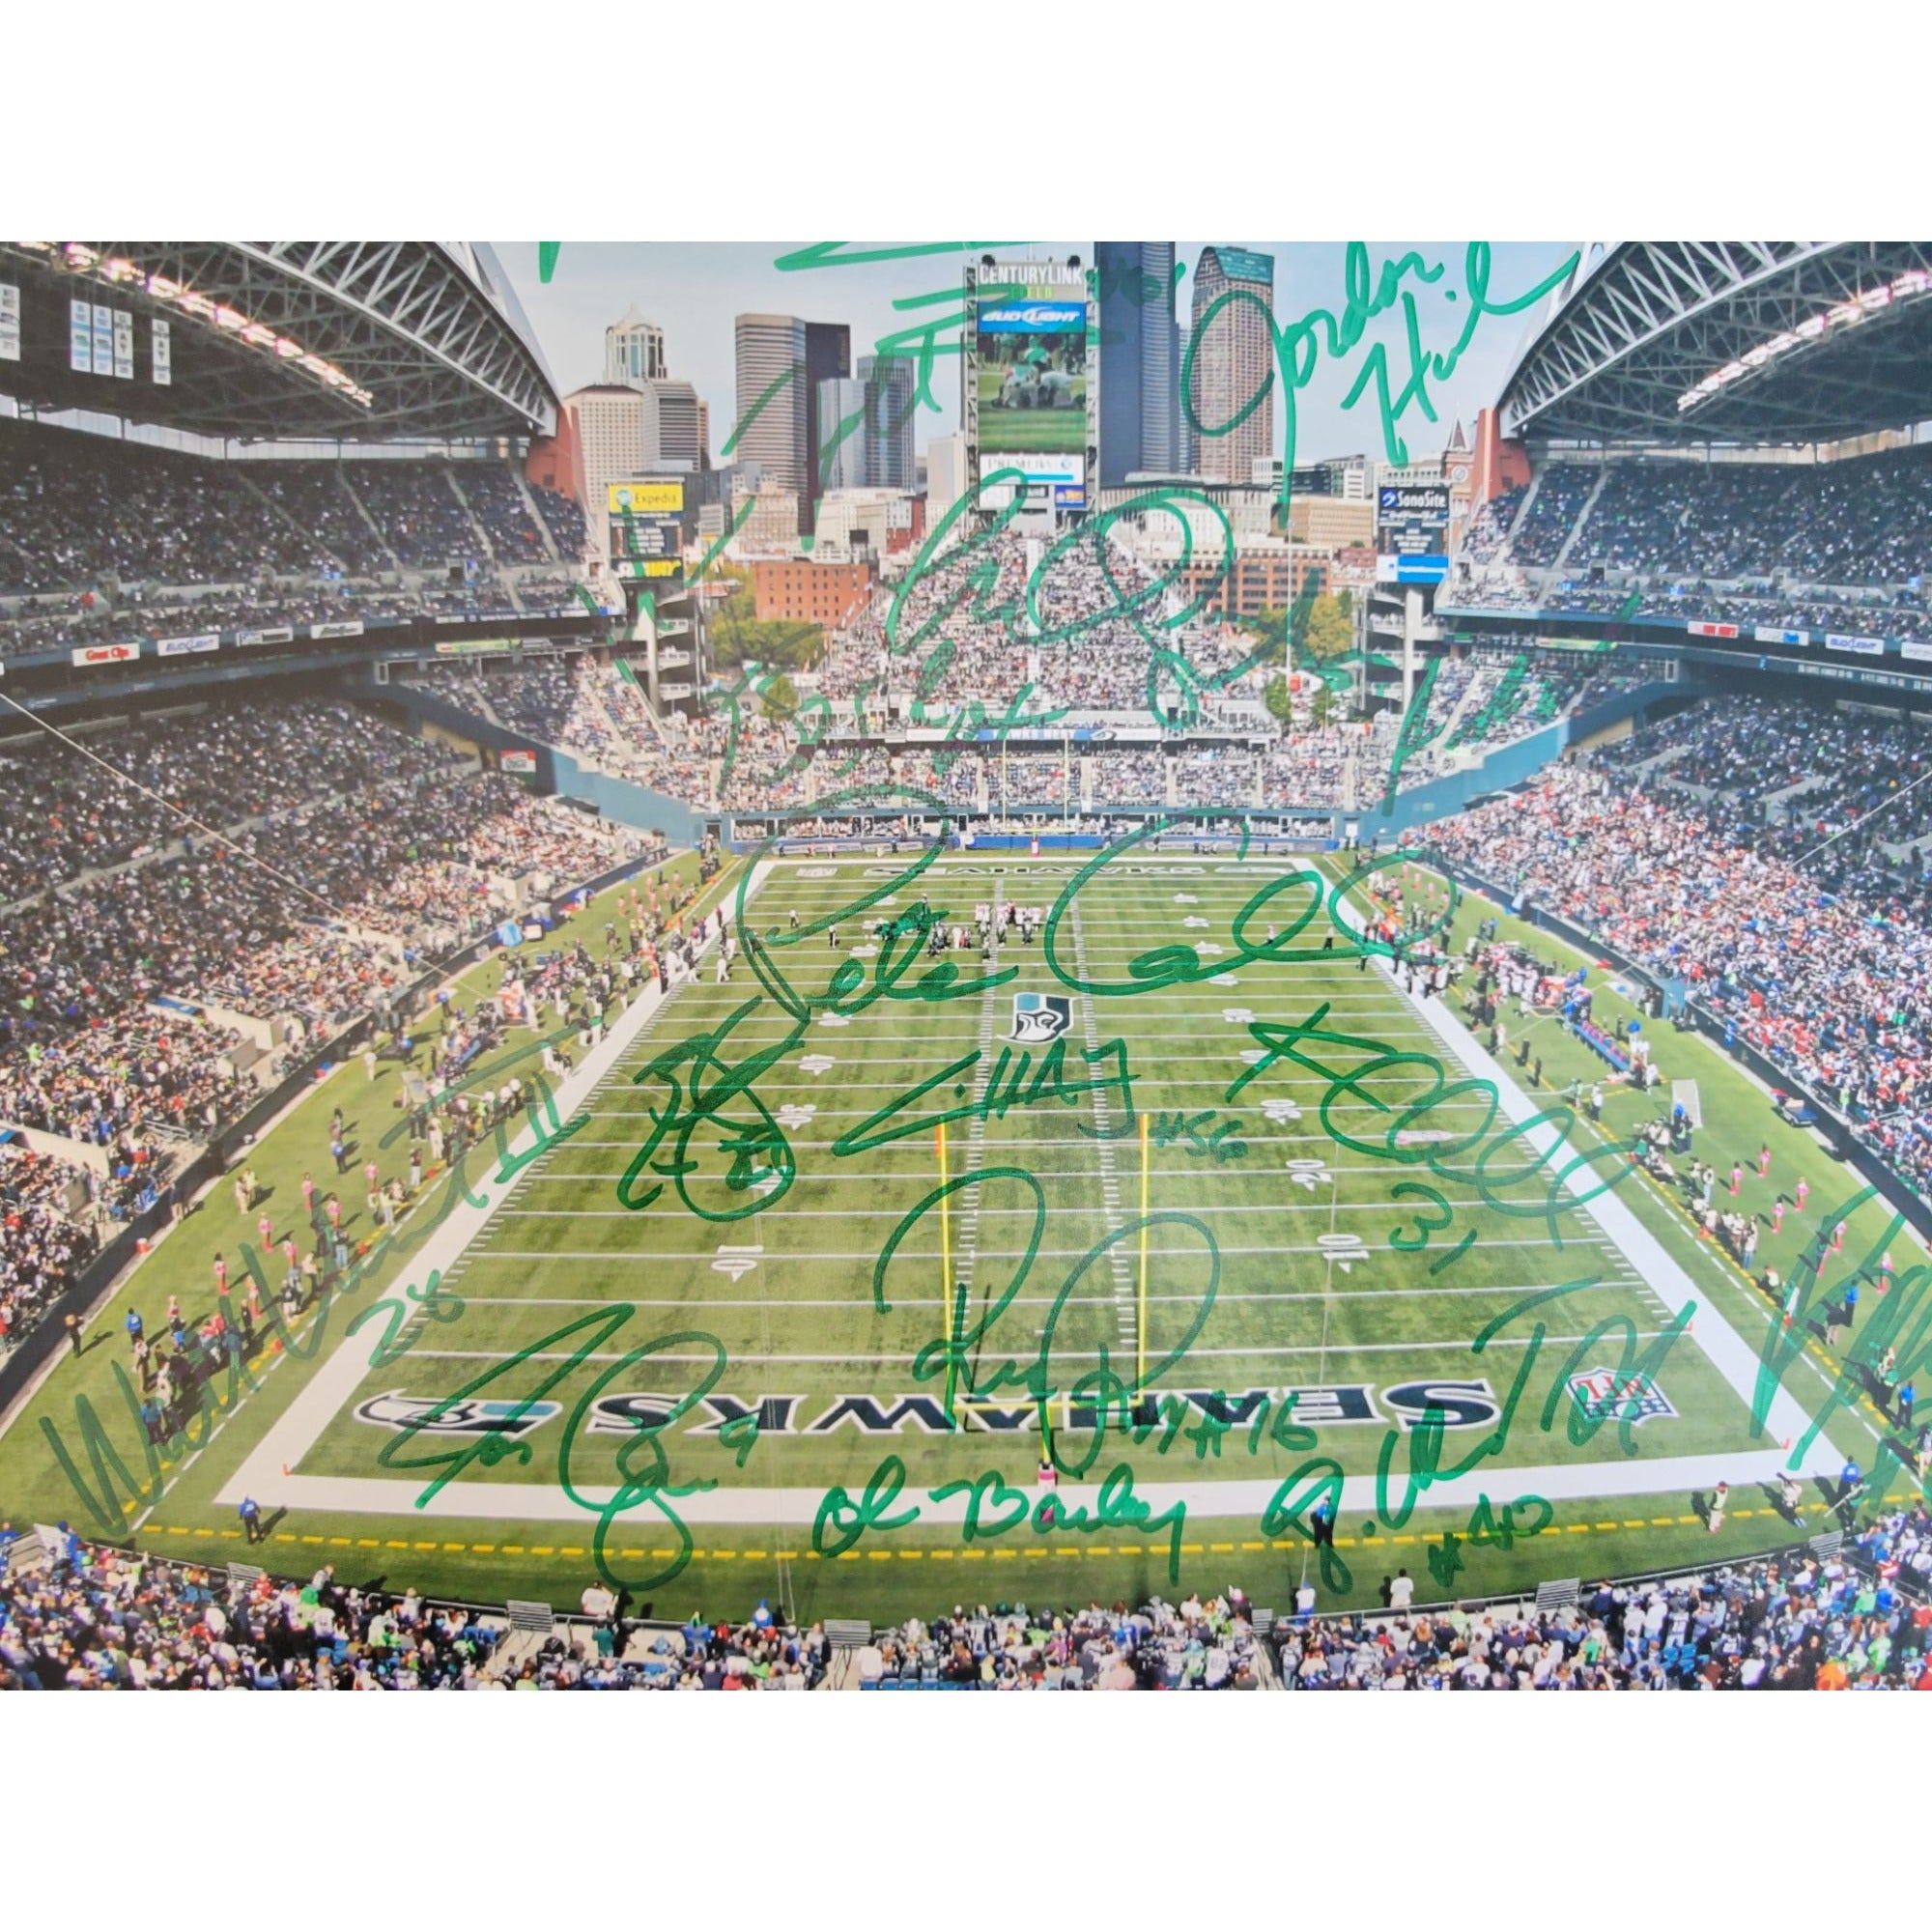 Seattle Seahawks Russell Wilson Marshawn Lynch Pete Carroll team signed 16 x 20 photo 2014 Super Bowl champs